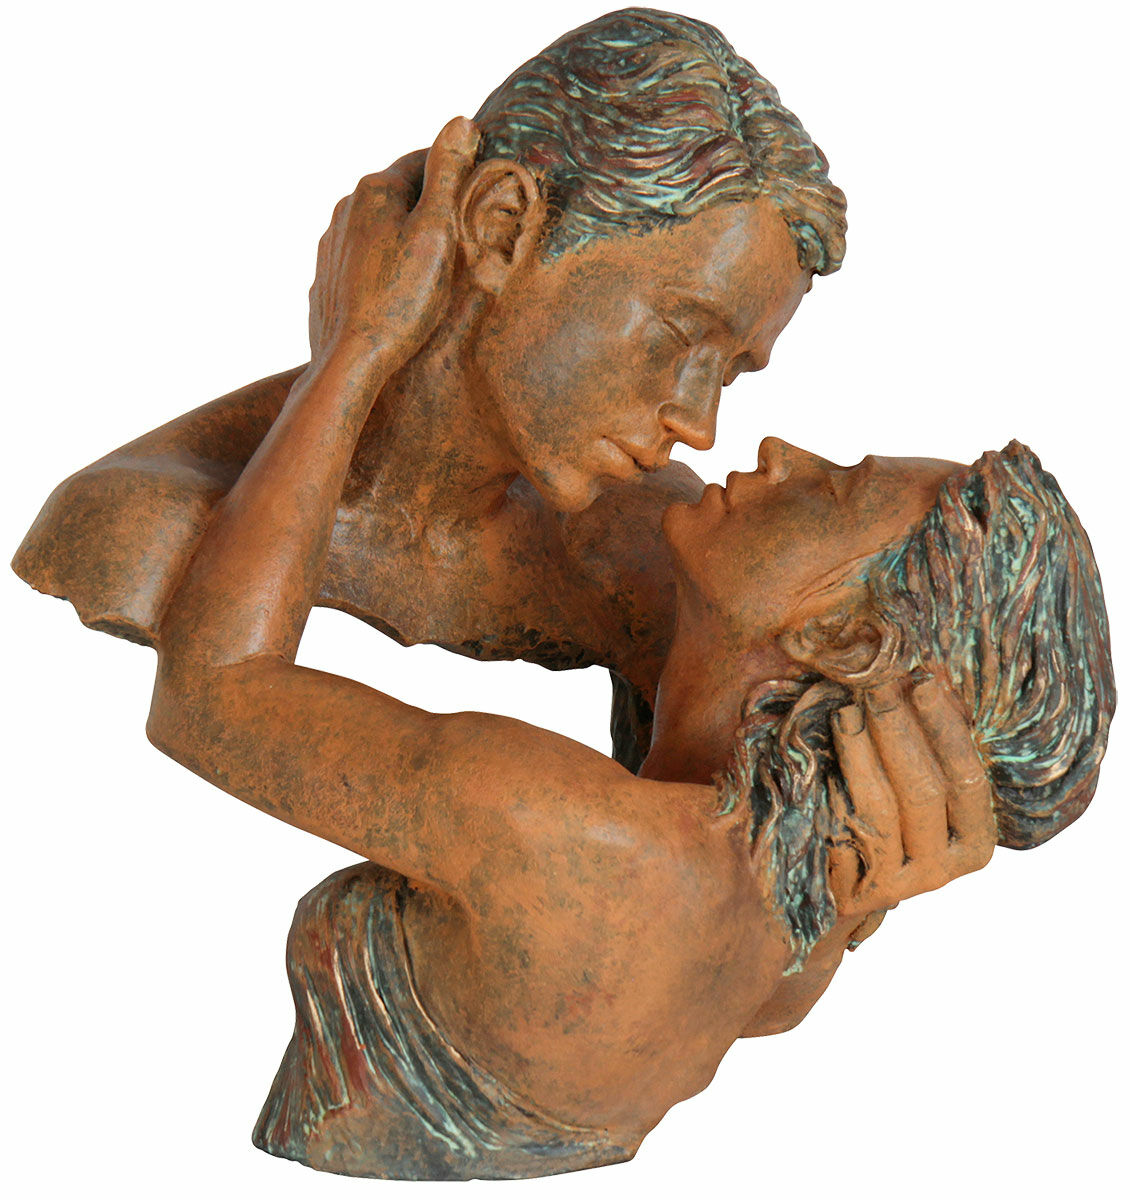 Sculpture "Passion", artificial stone by Angeles Anglada